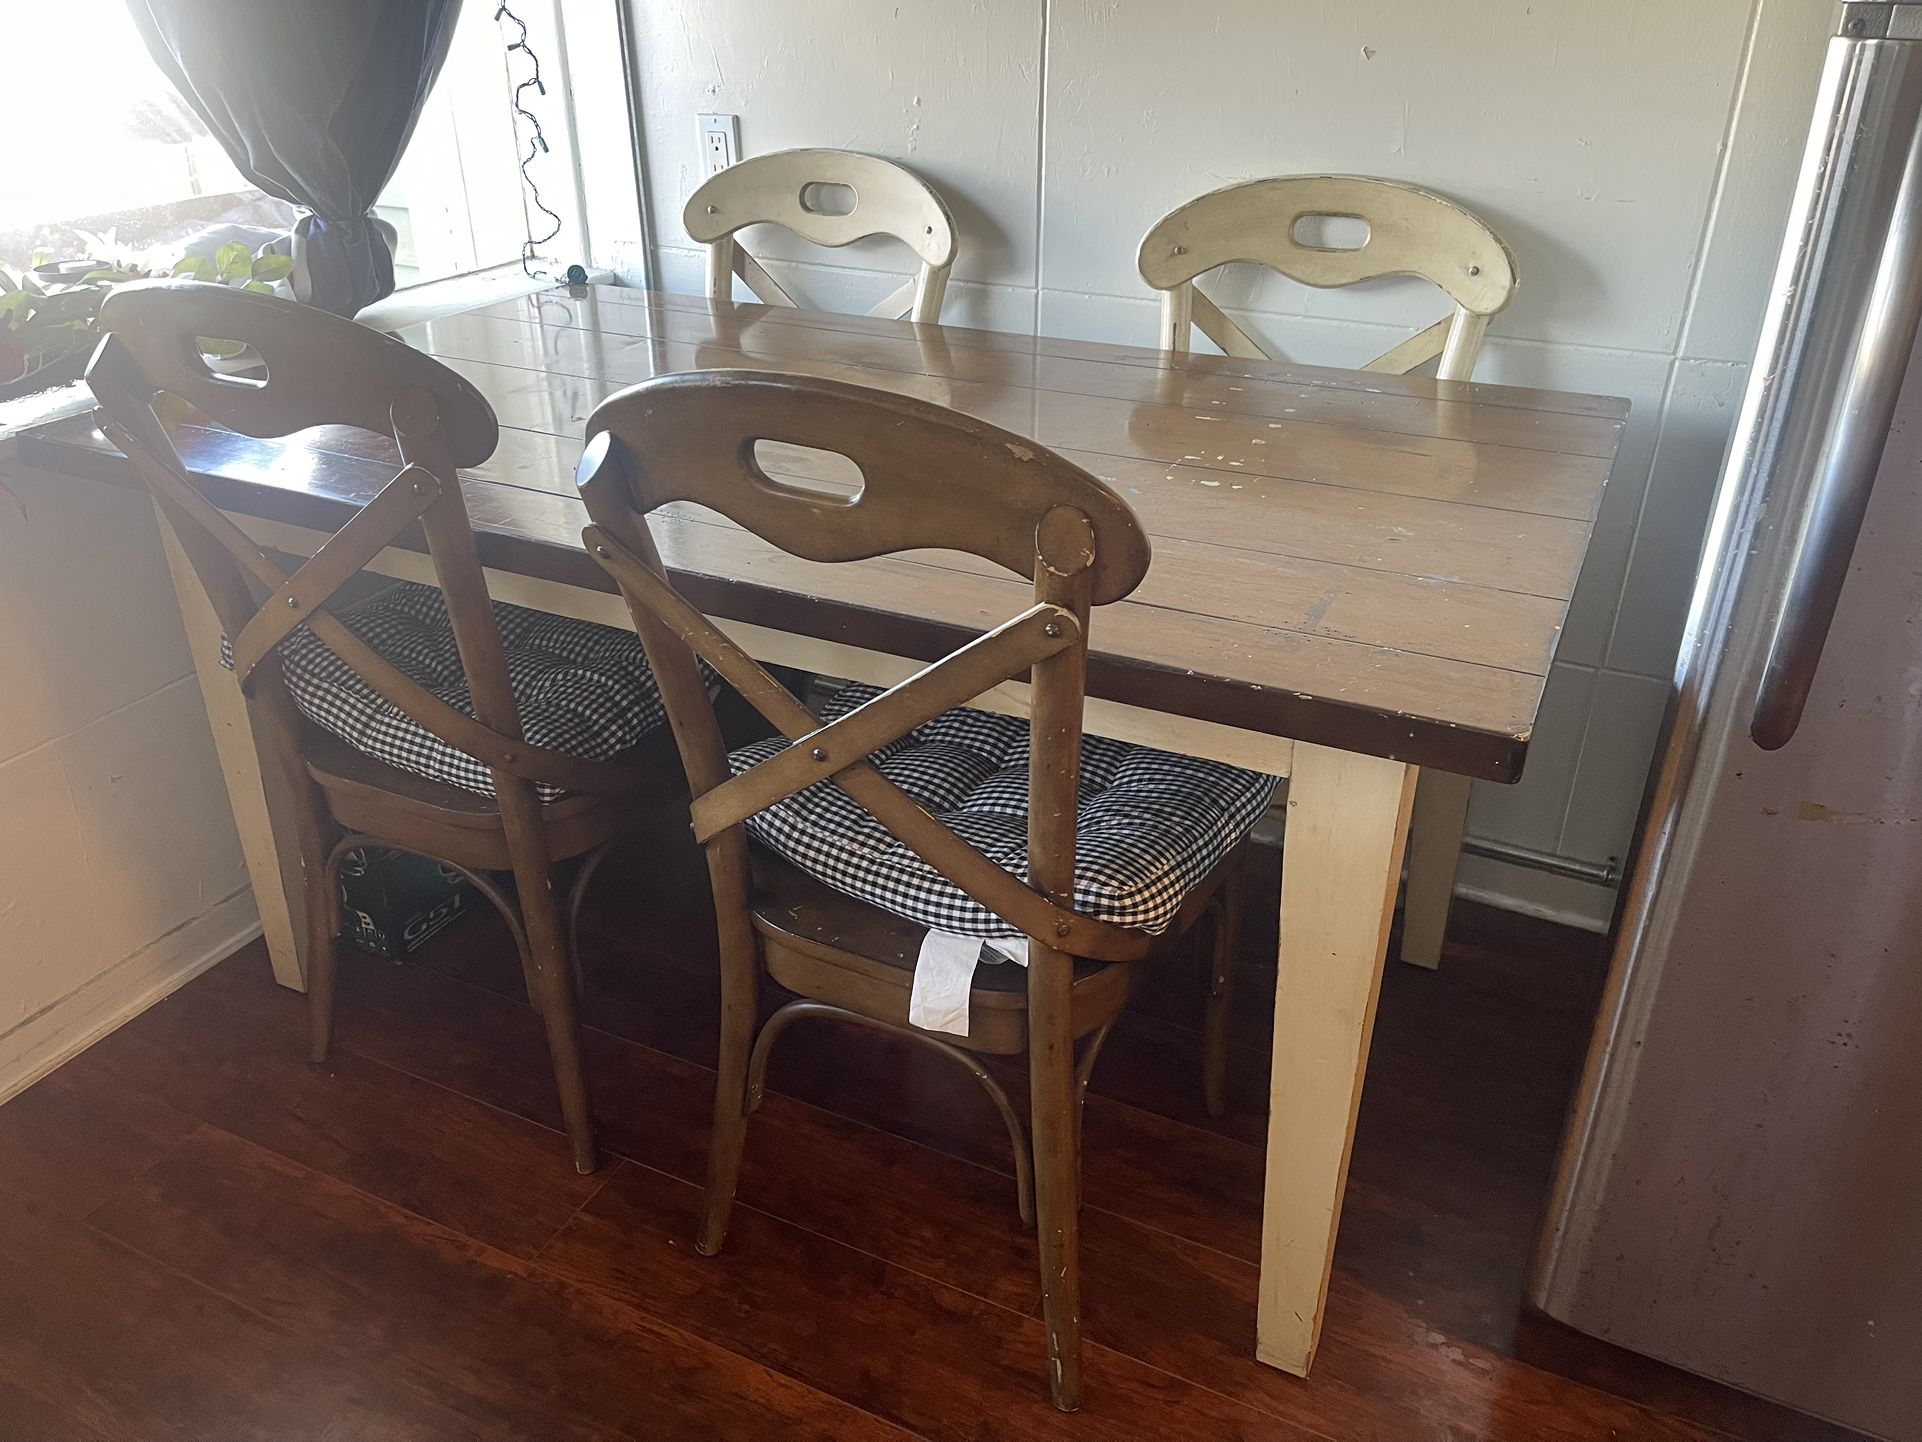 Kitchen Table + Chairs